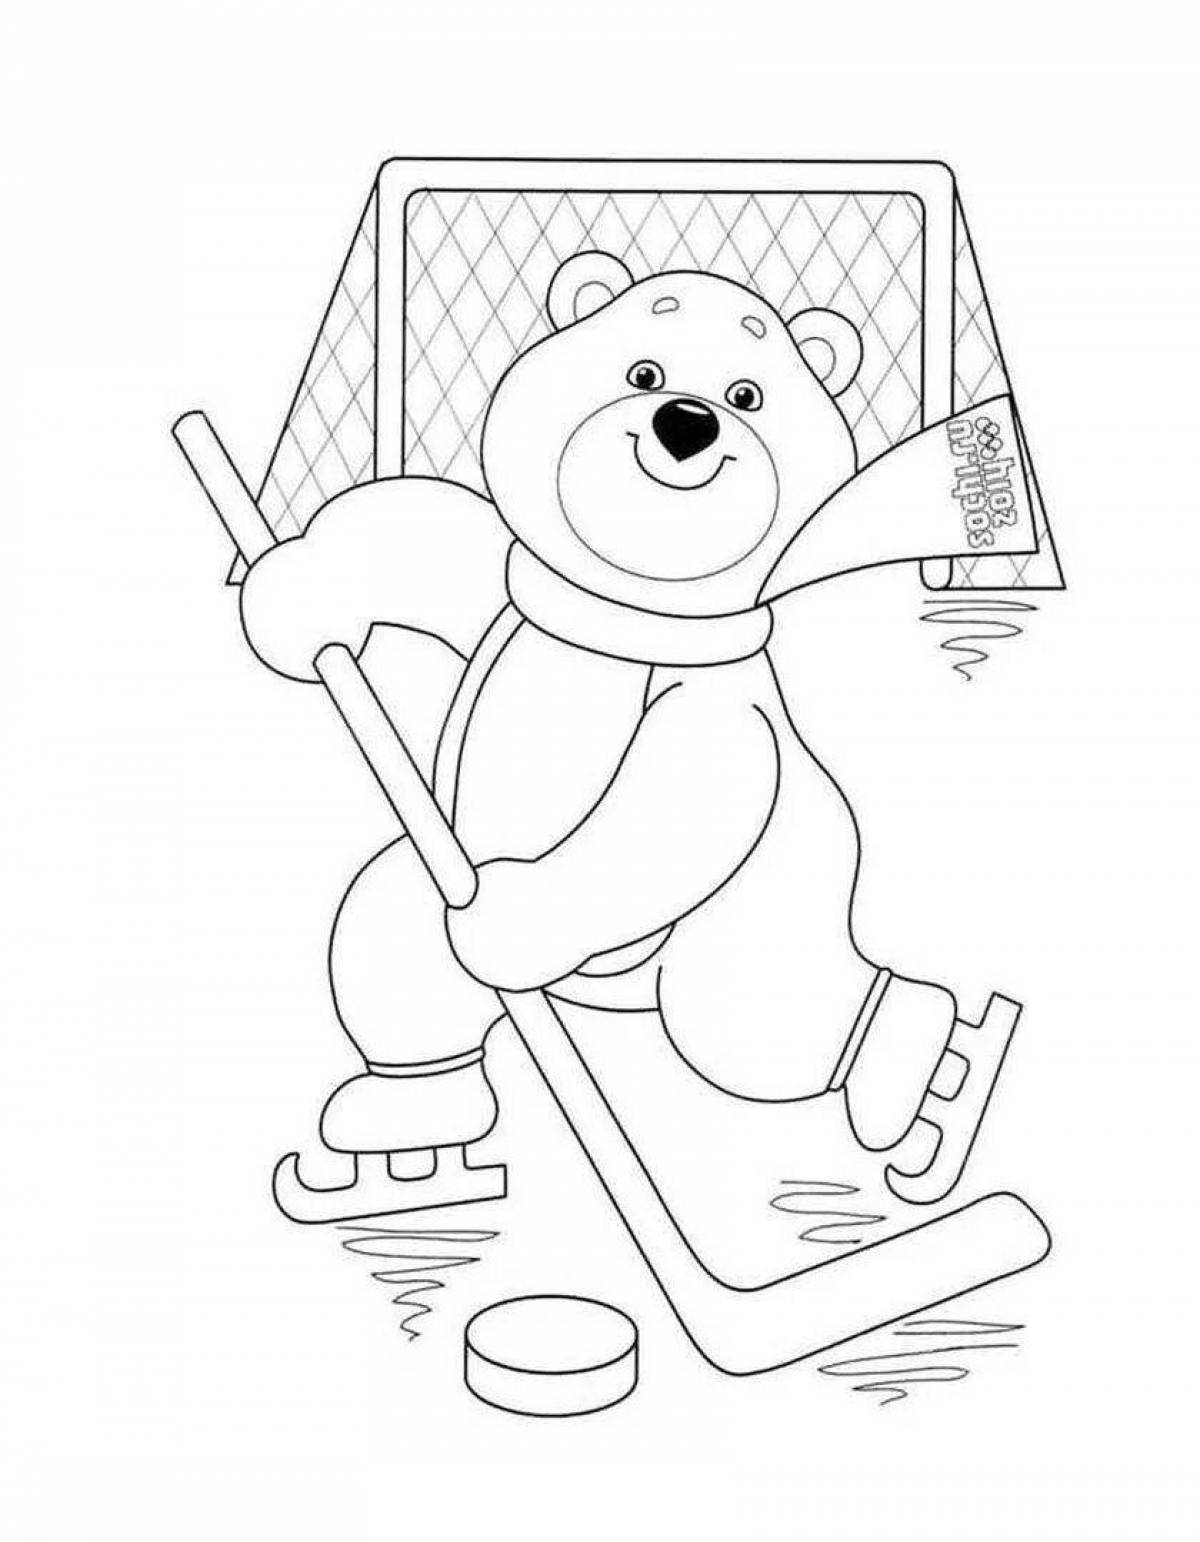 Joyful coloring for children, olympic sports